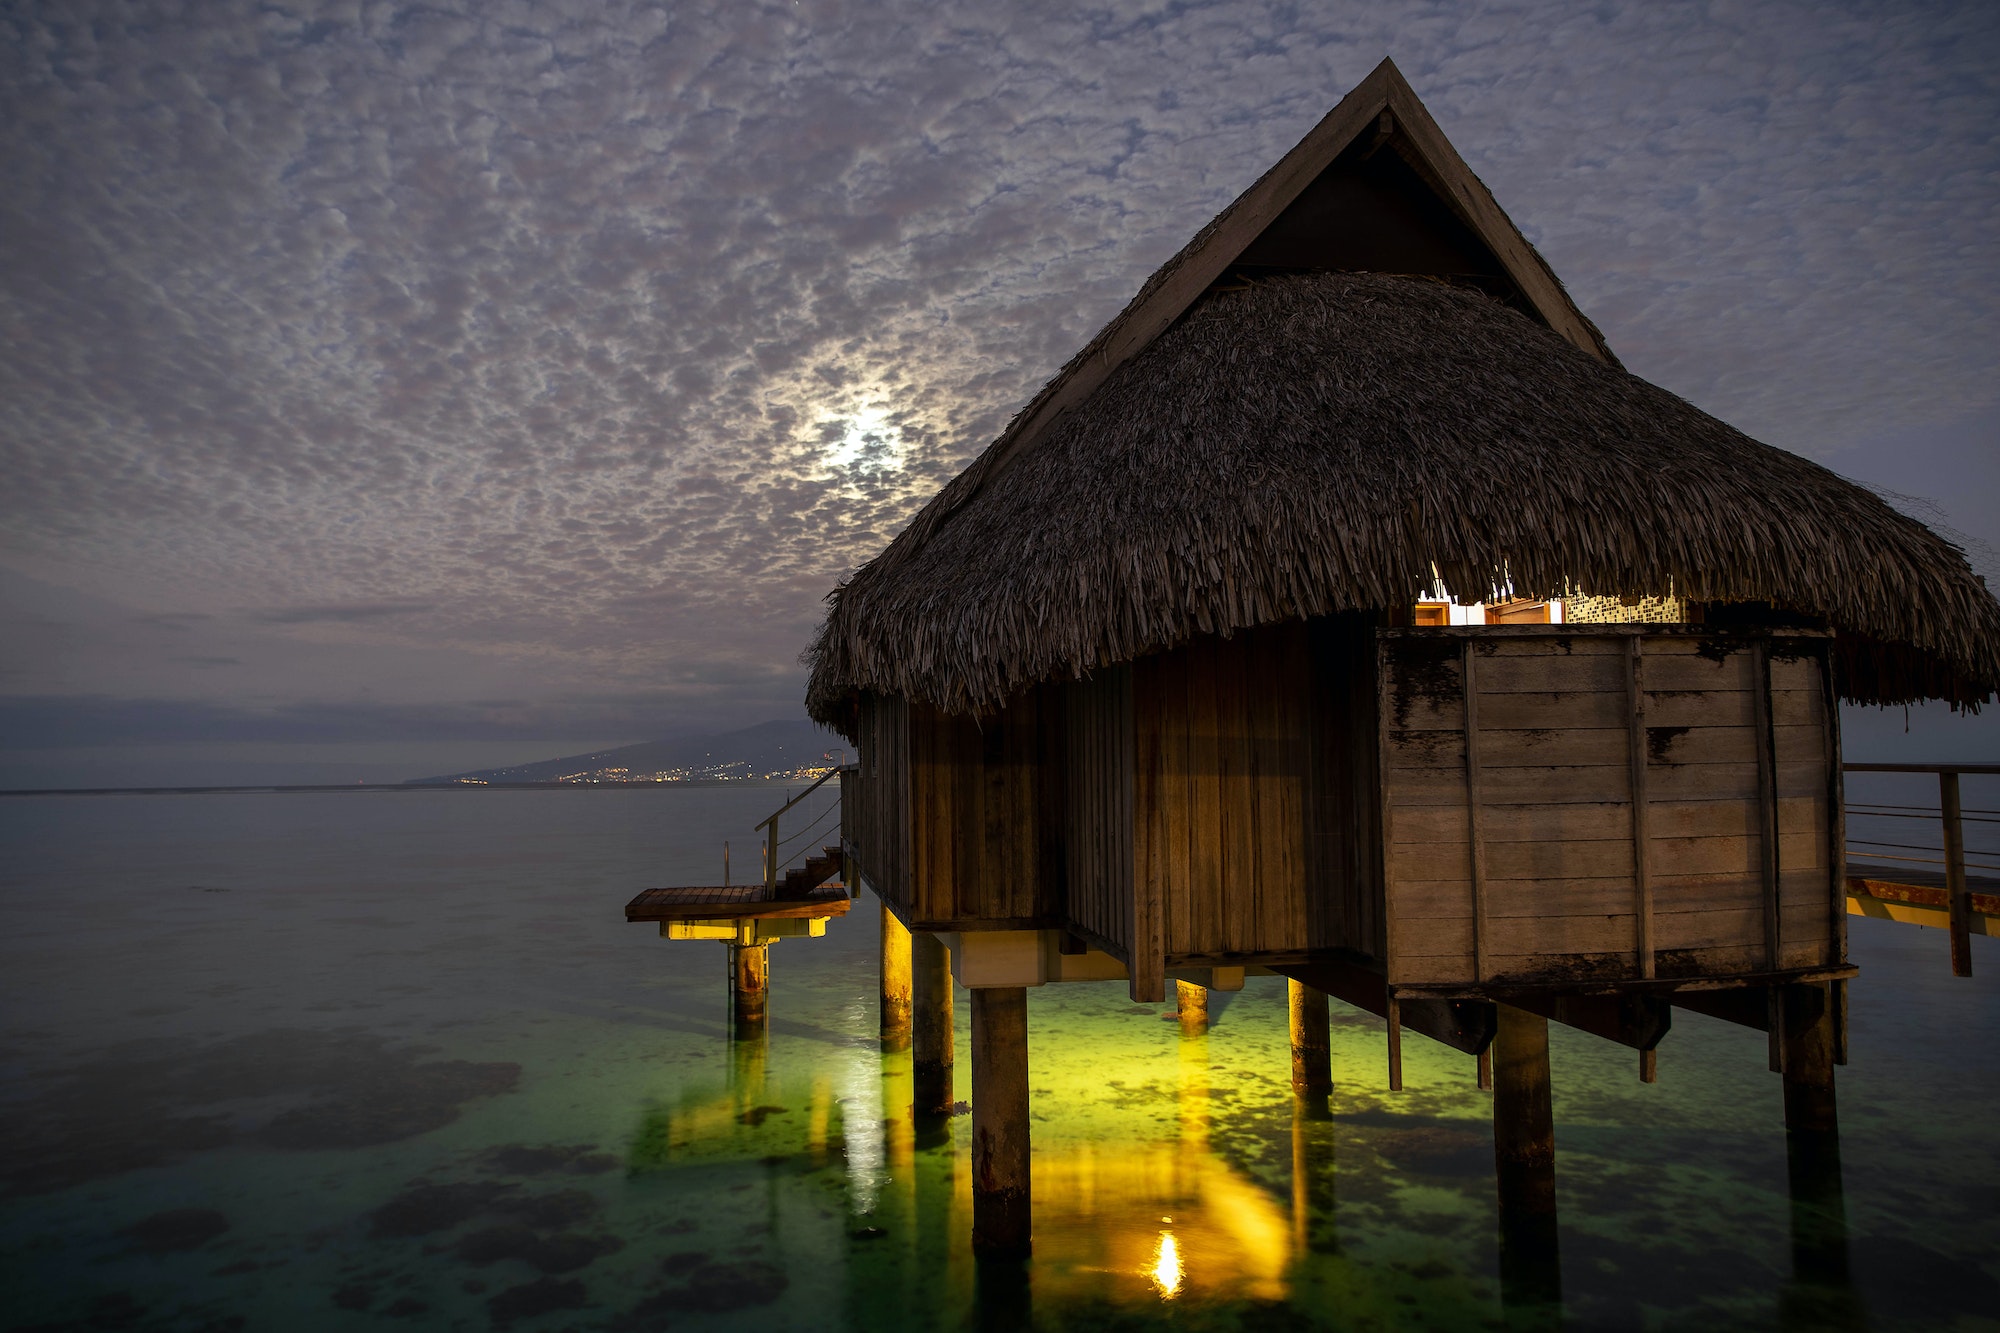 Overwater bungalow hut seen at night under cloudy sky on tropical island